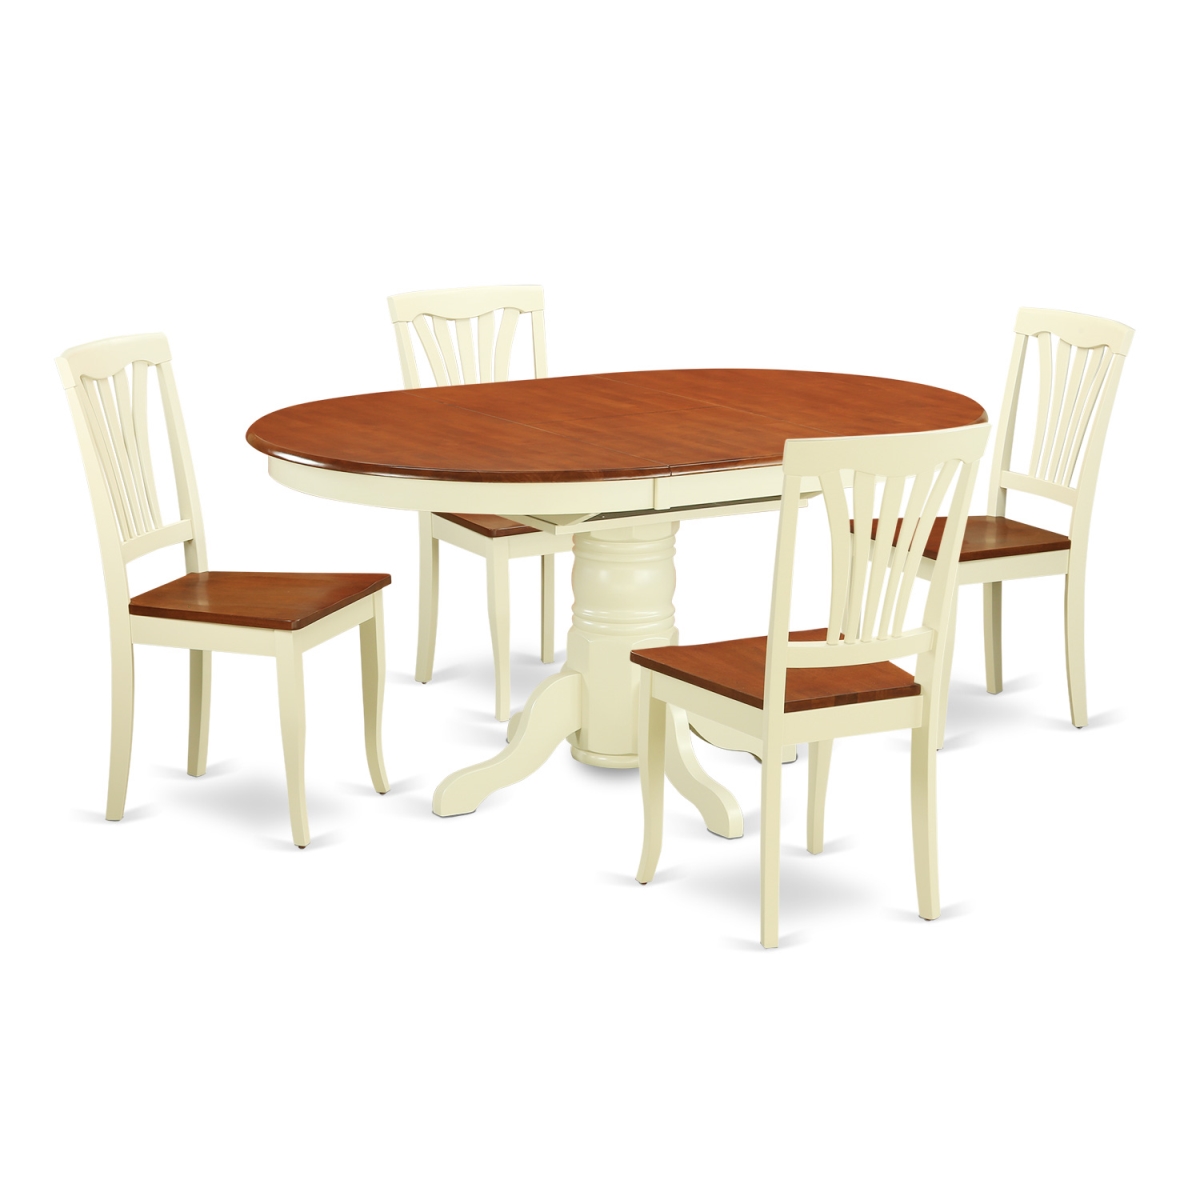 Picture of East West Furniture AVON5-WHI-W Dinette Table with Leaf & 4 Wood Seat Chairs, Buttermilk & Cherry - 5 Piece